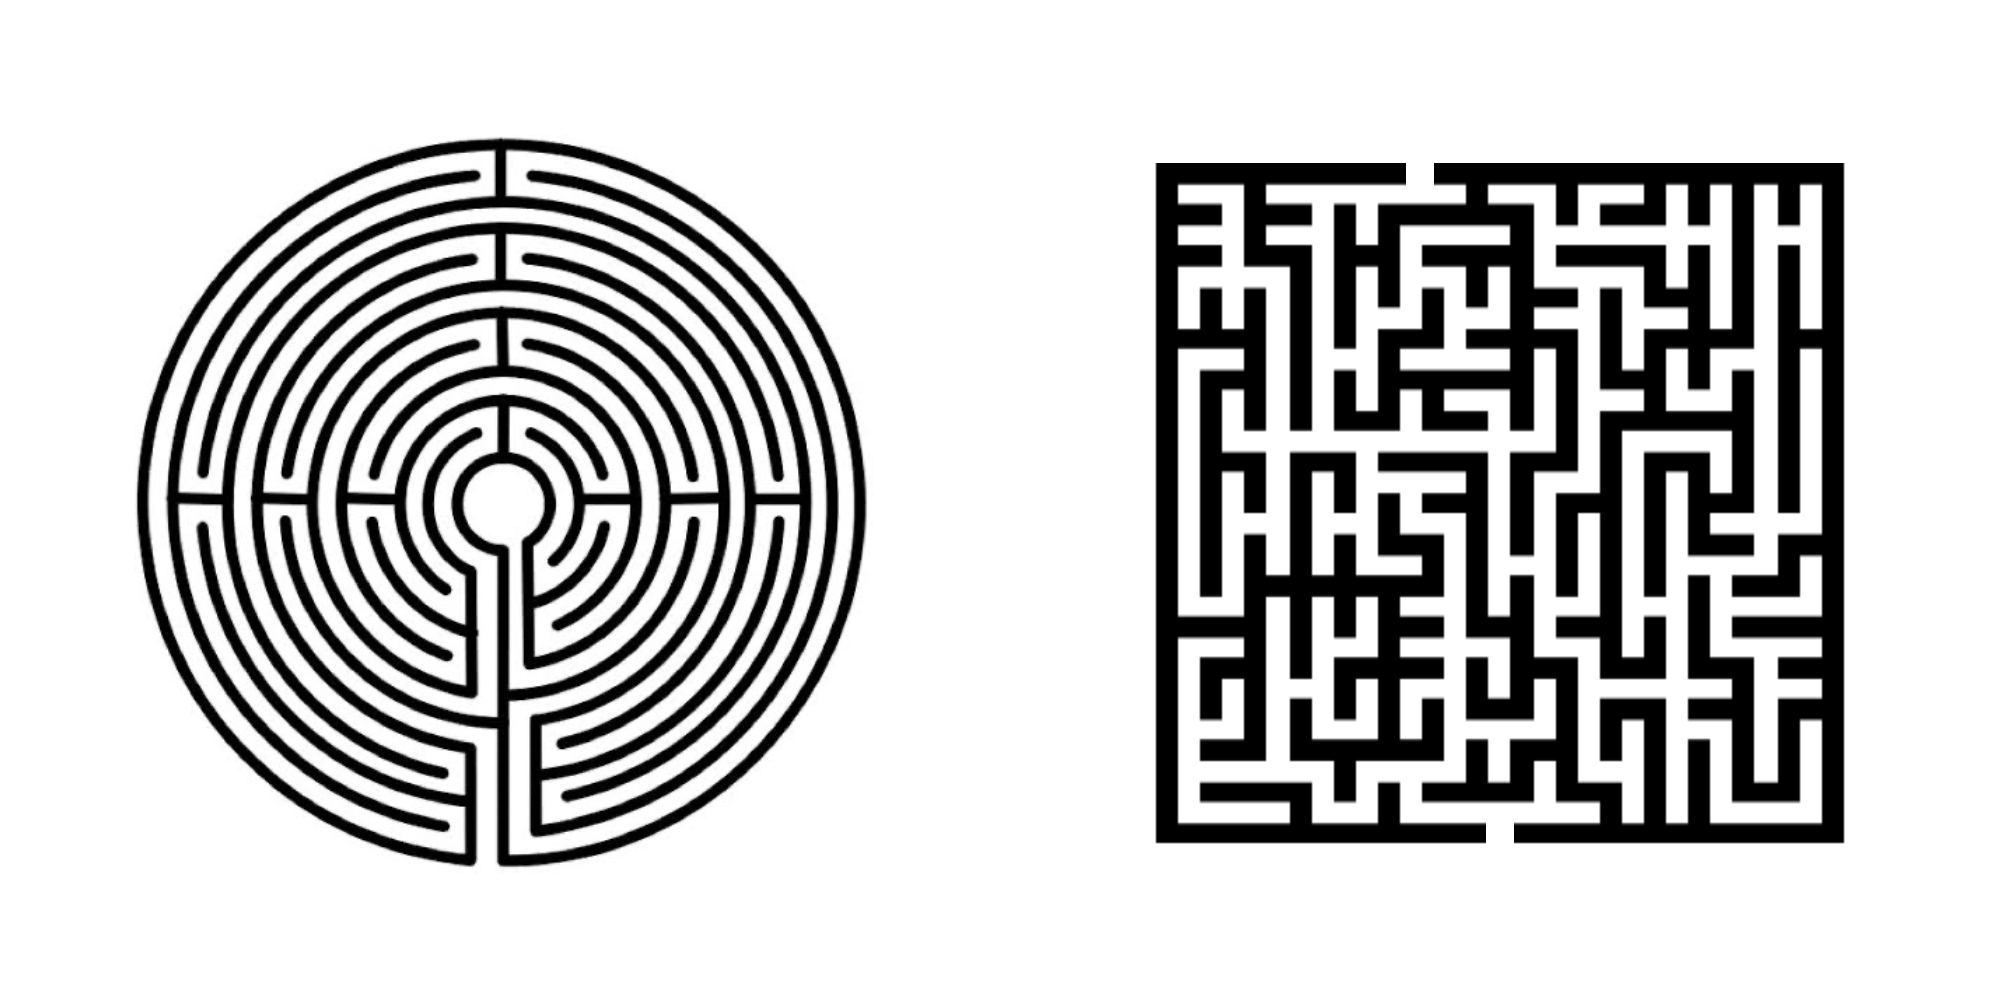 The unicursal labyrinth and the maze